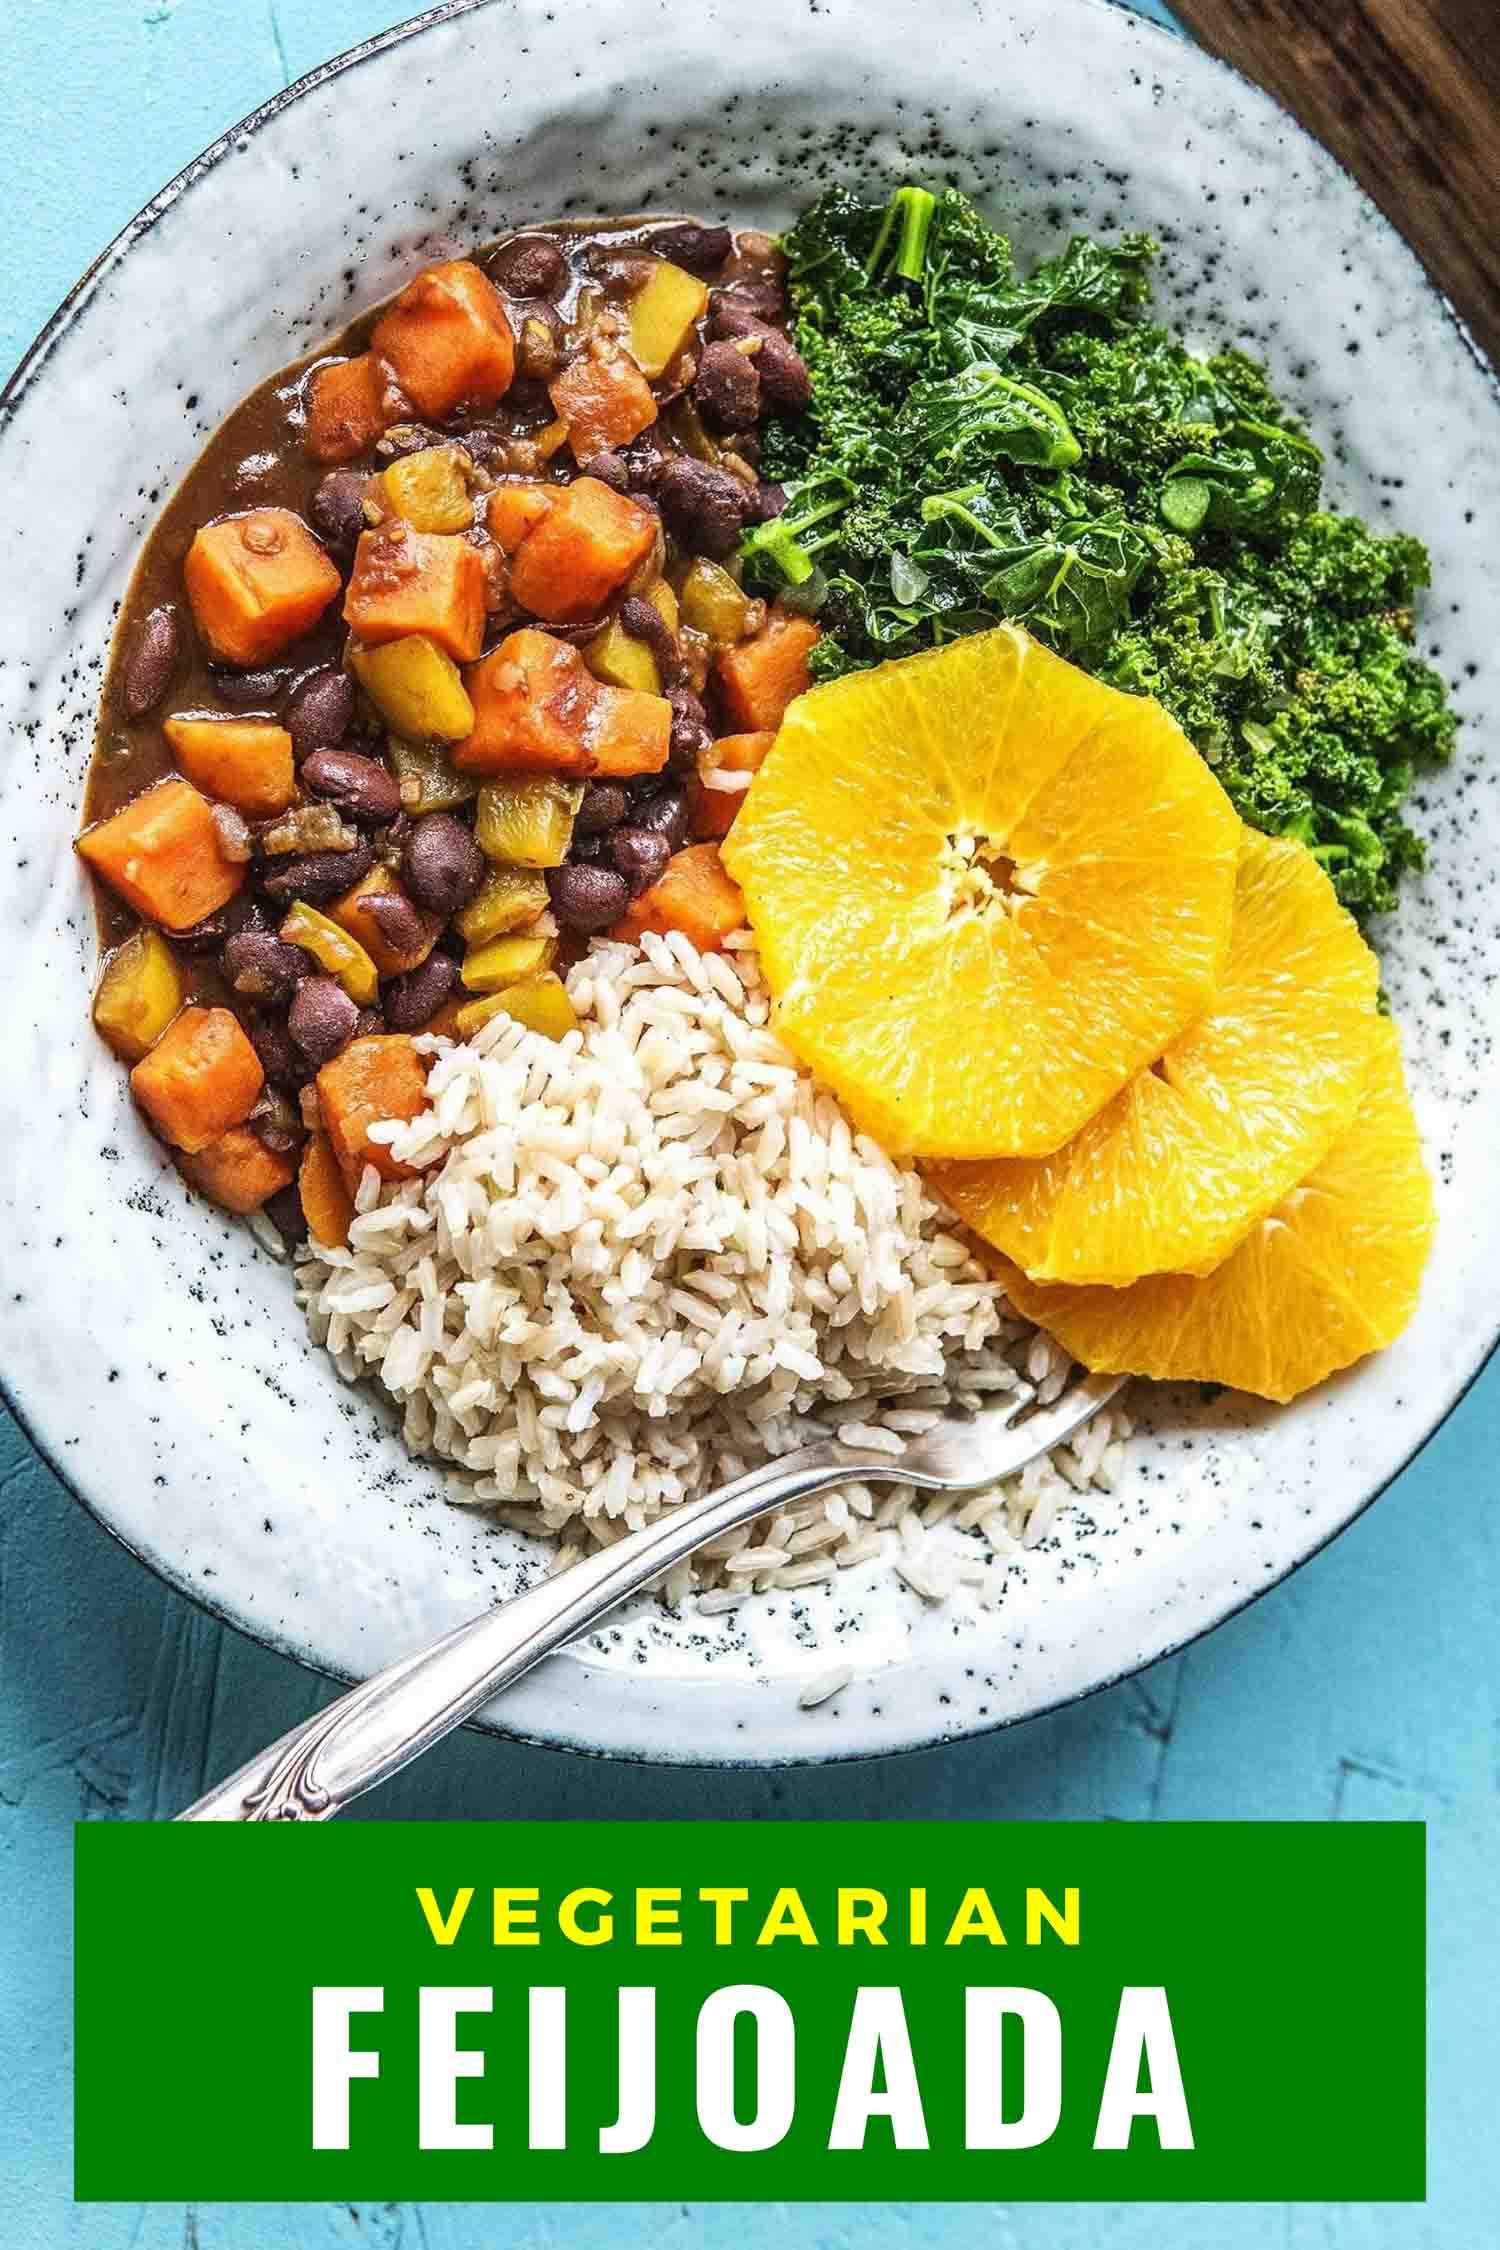 Vegetarian feijoada with slides of orange and kale on a white plate and black background.